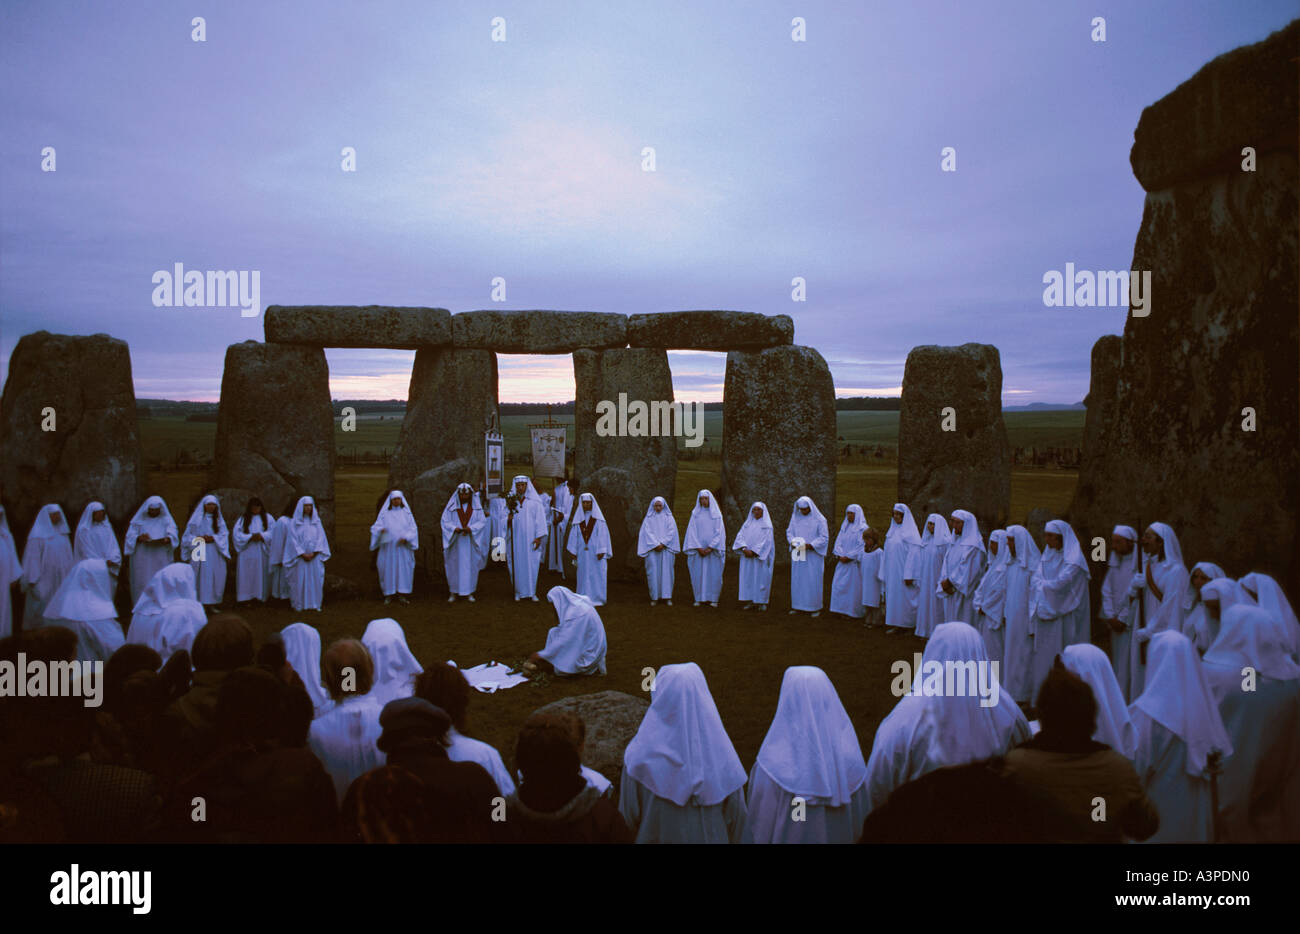 Druids celebrate the summer solstice at sunrise on June 21 within the